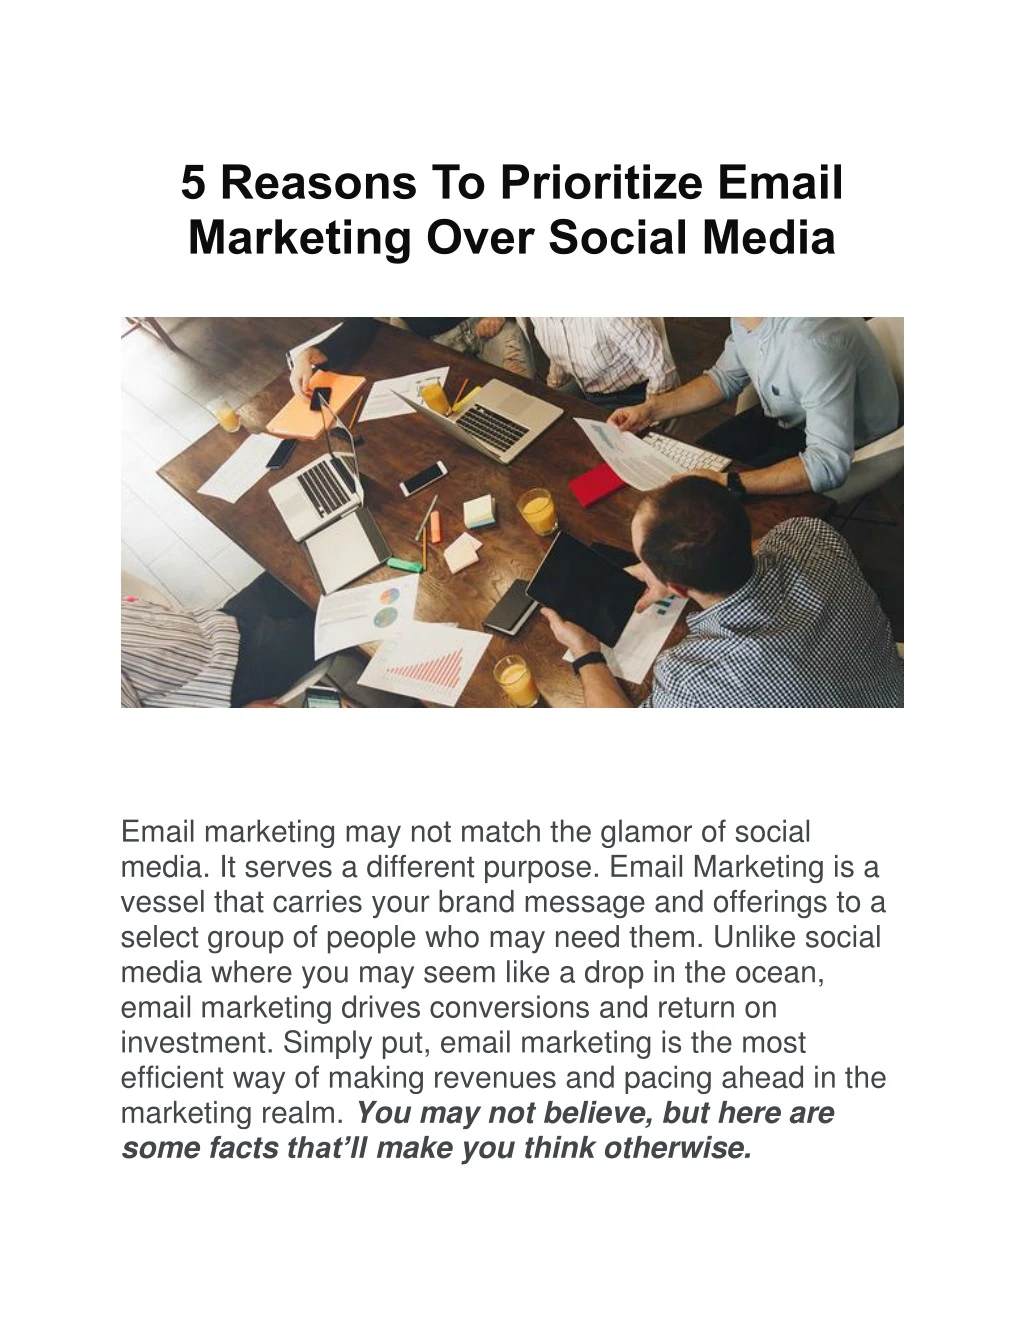 5 reasons to prioritize email marketing over